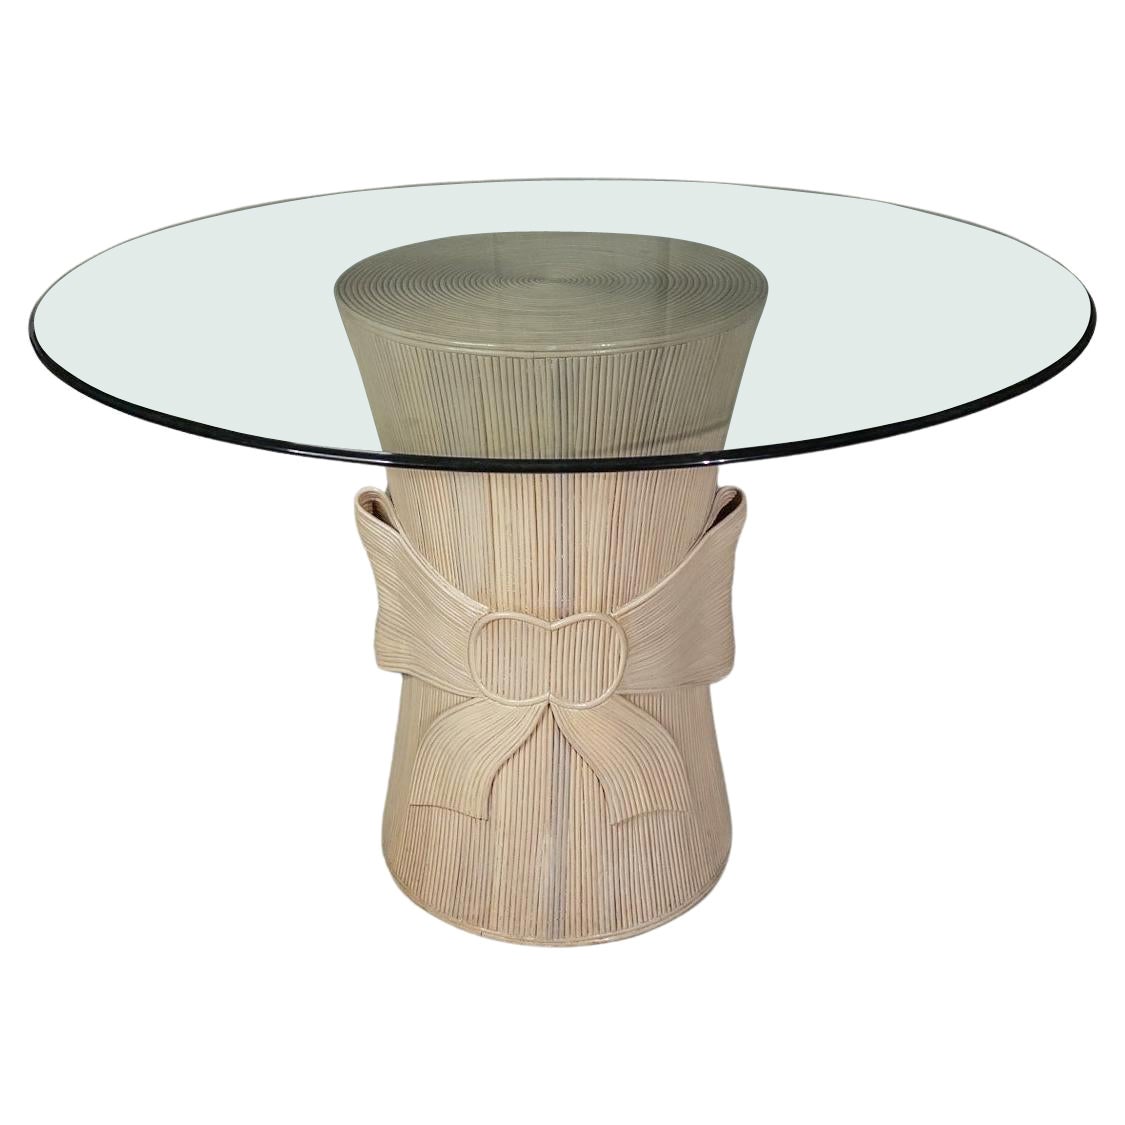 Gabriella Crespi Style Rattan Split Reed Trompe l'Oeil Bow Table with Glass Top For Sale